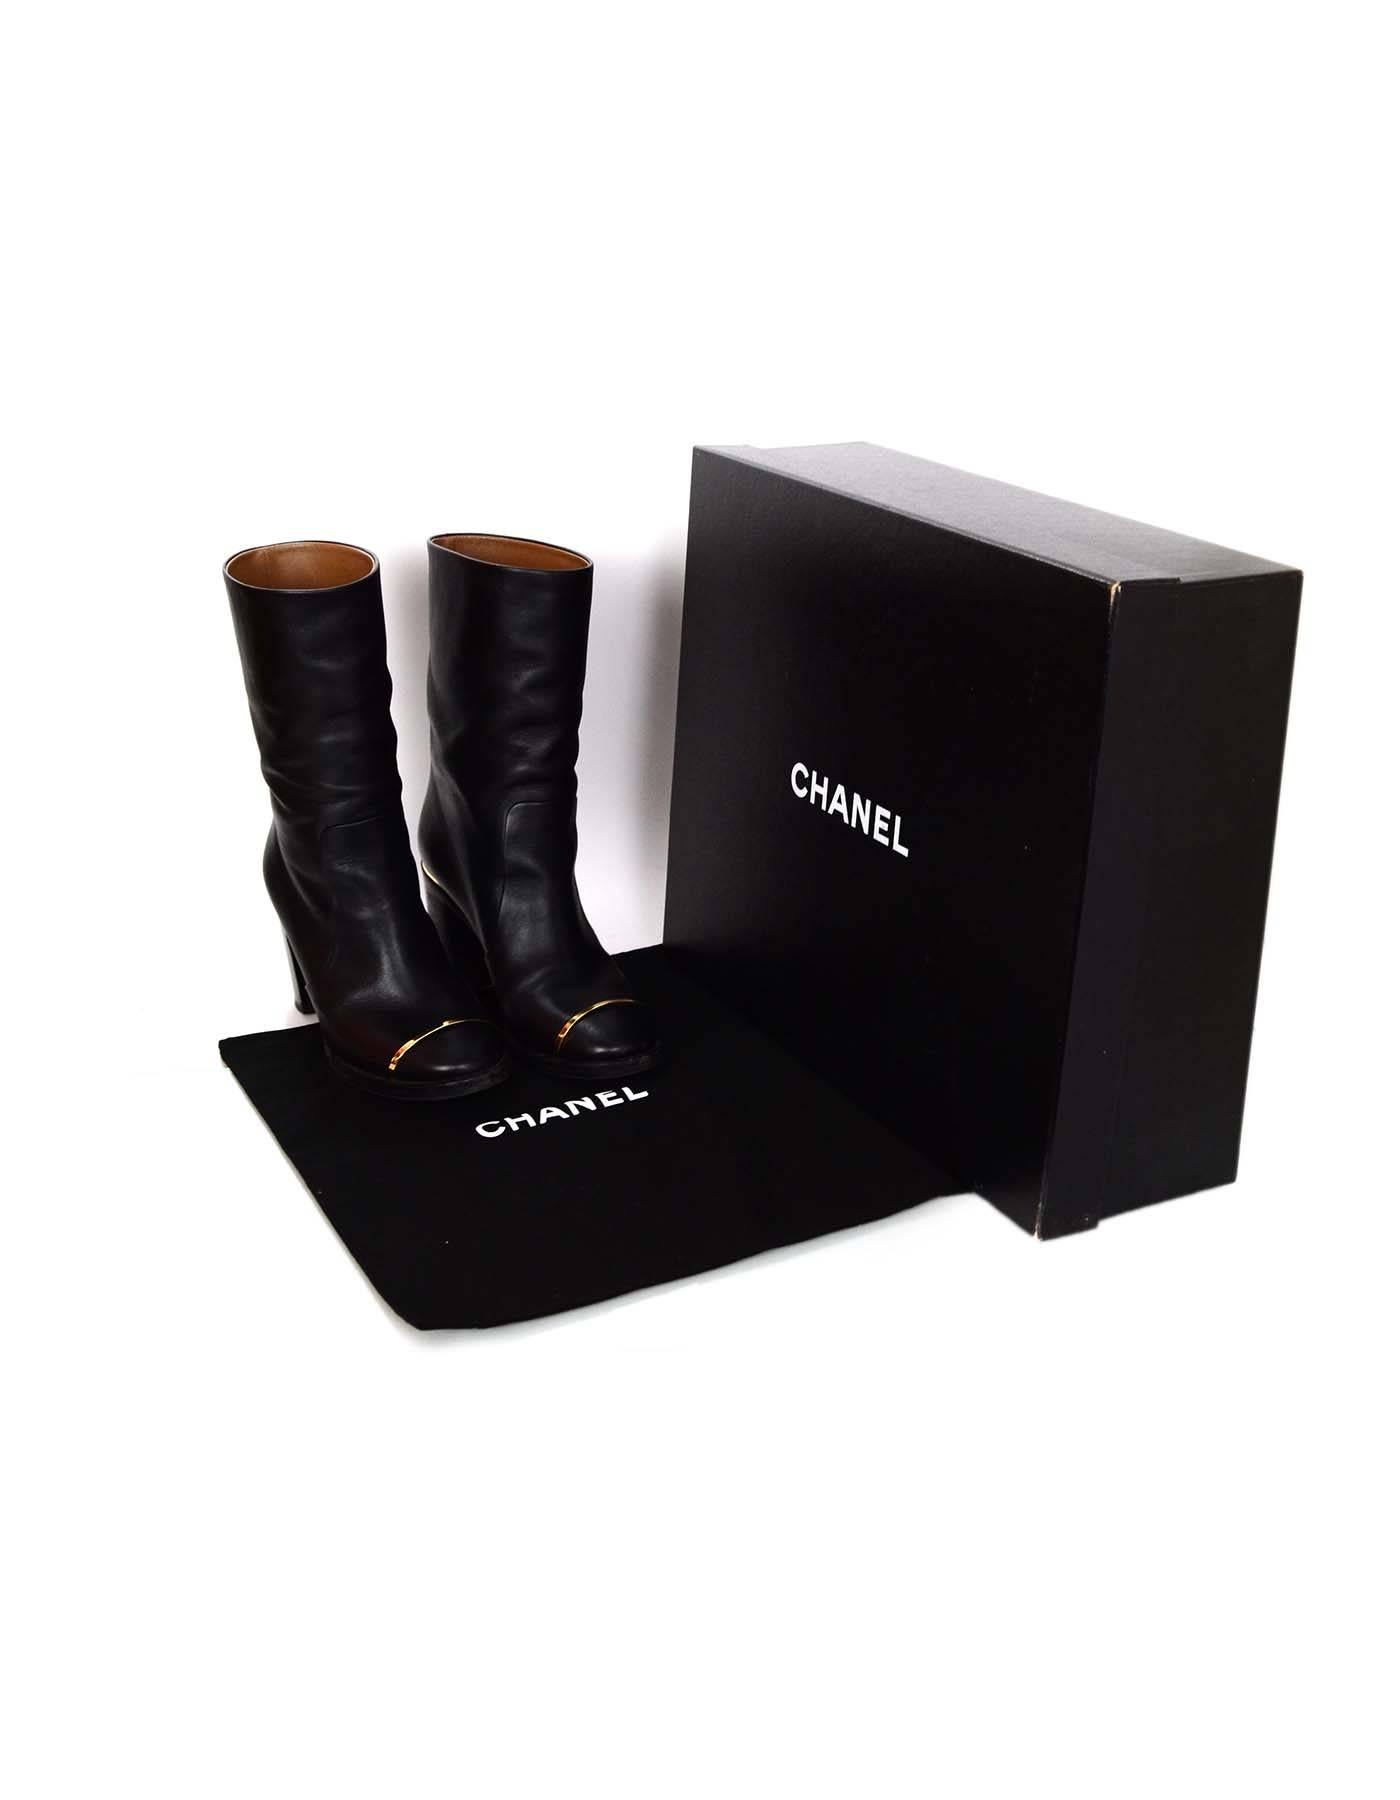 Chanel Black Leather Boots Sz 37.5 3